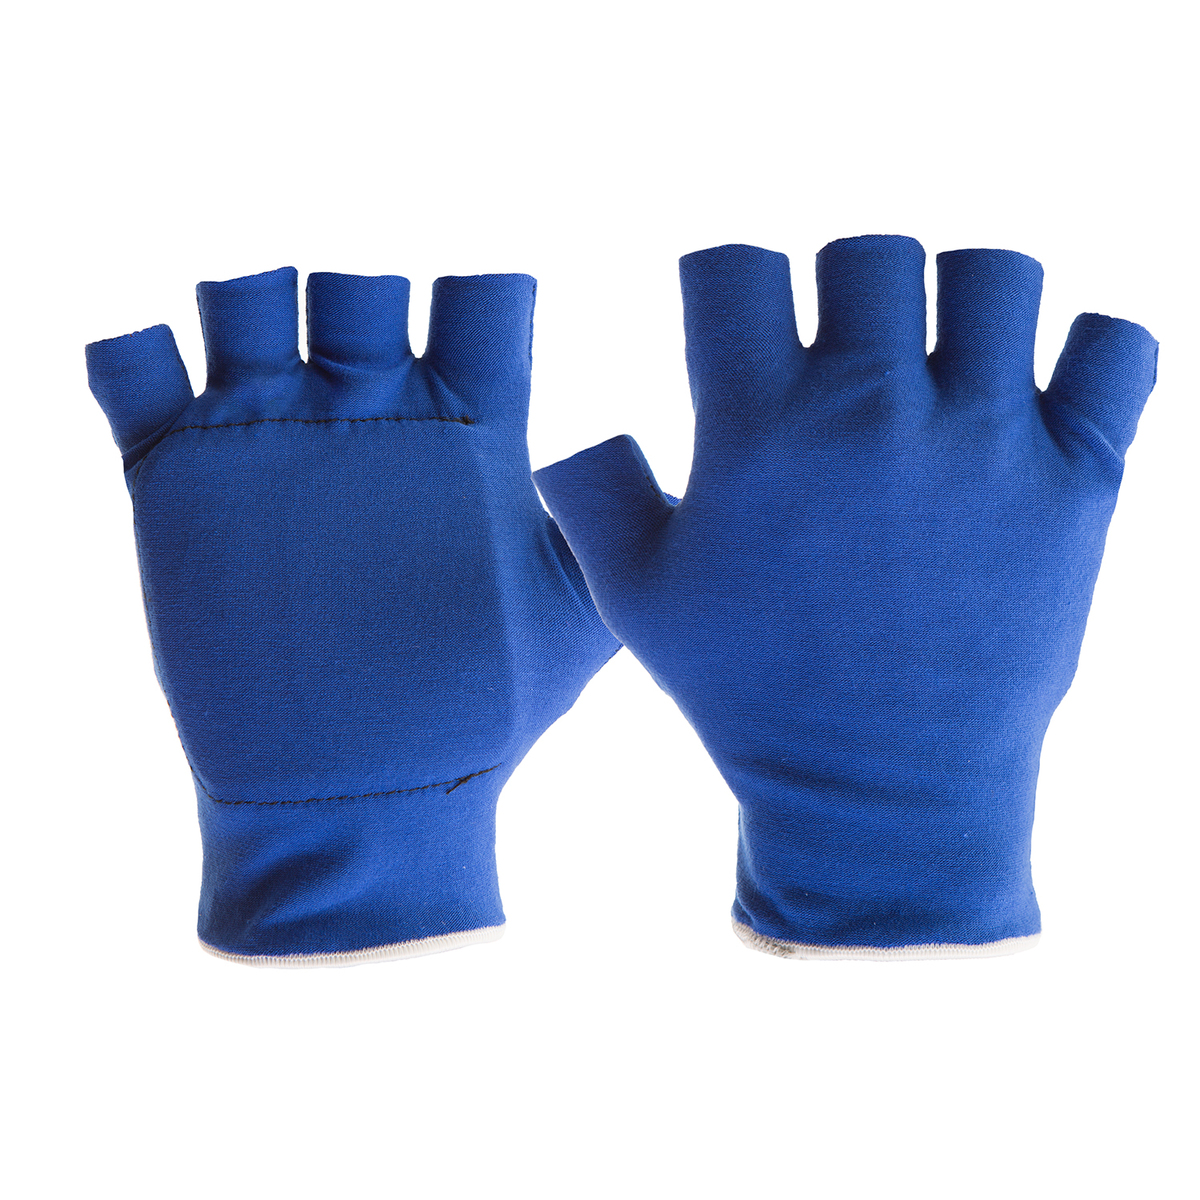 Impacto Protective Products Large Blue Cotton And Polyester Half Finger Left Hand Only Anti-Impact Mechanics Gloves Liner